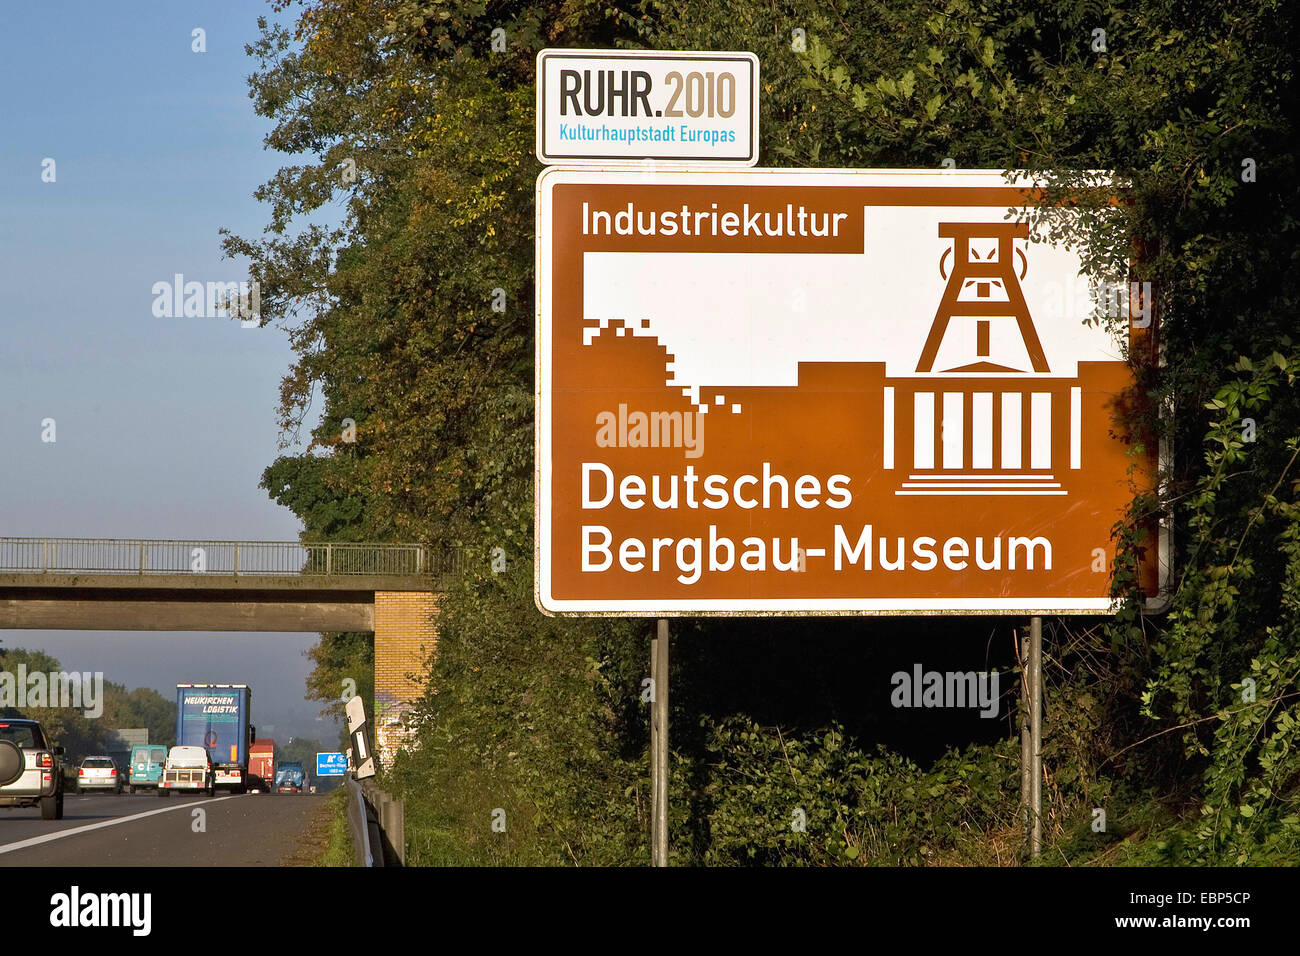 information sign on a highway in Ruhrgebiet about the German Mining Museum, Deutsches Bergbau-Museum Bochum, Germany, North Rhine-Westphalia, Ruhr Area, Bochum Stock Photo